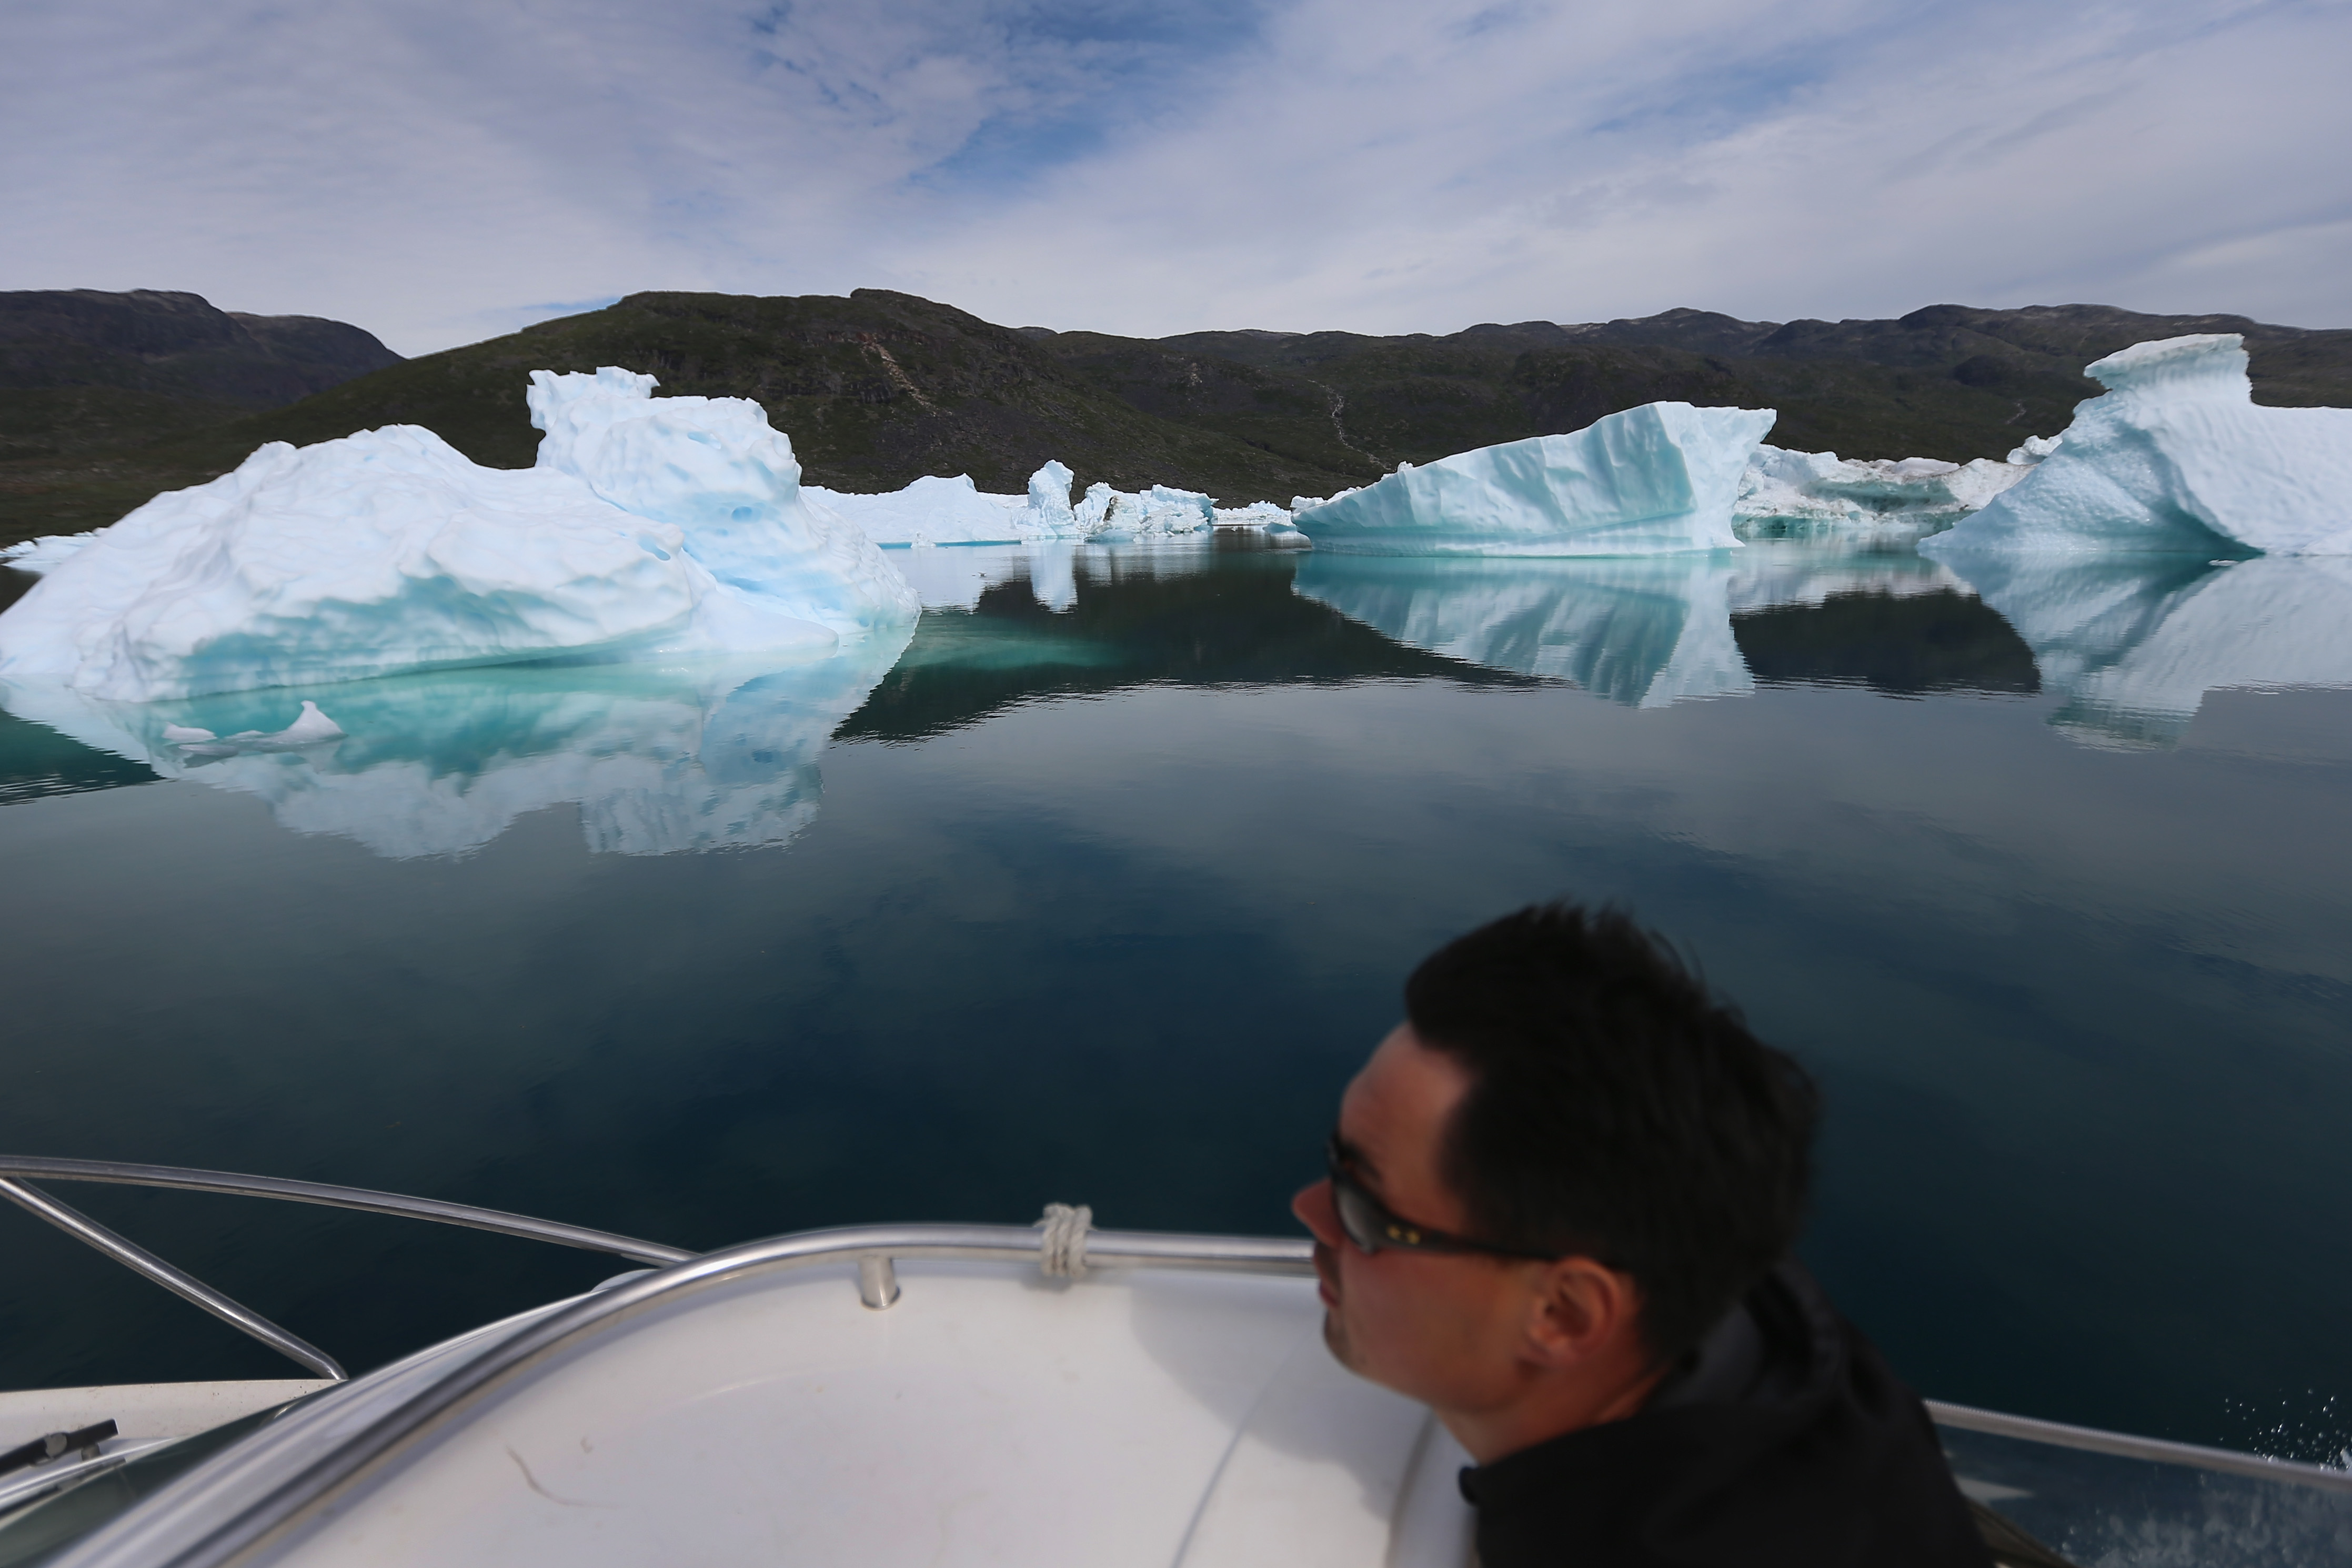 Kunuk Nielsen navigates his boat among calved icebergs from the nearby Twin Glaciers on July 31, 2013 in Qaqortoq, Greenland. (Joe Raedle—Getty Images)